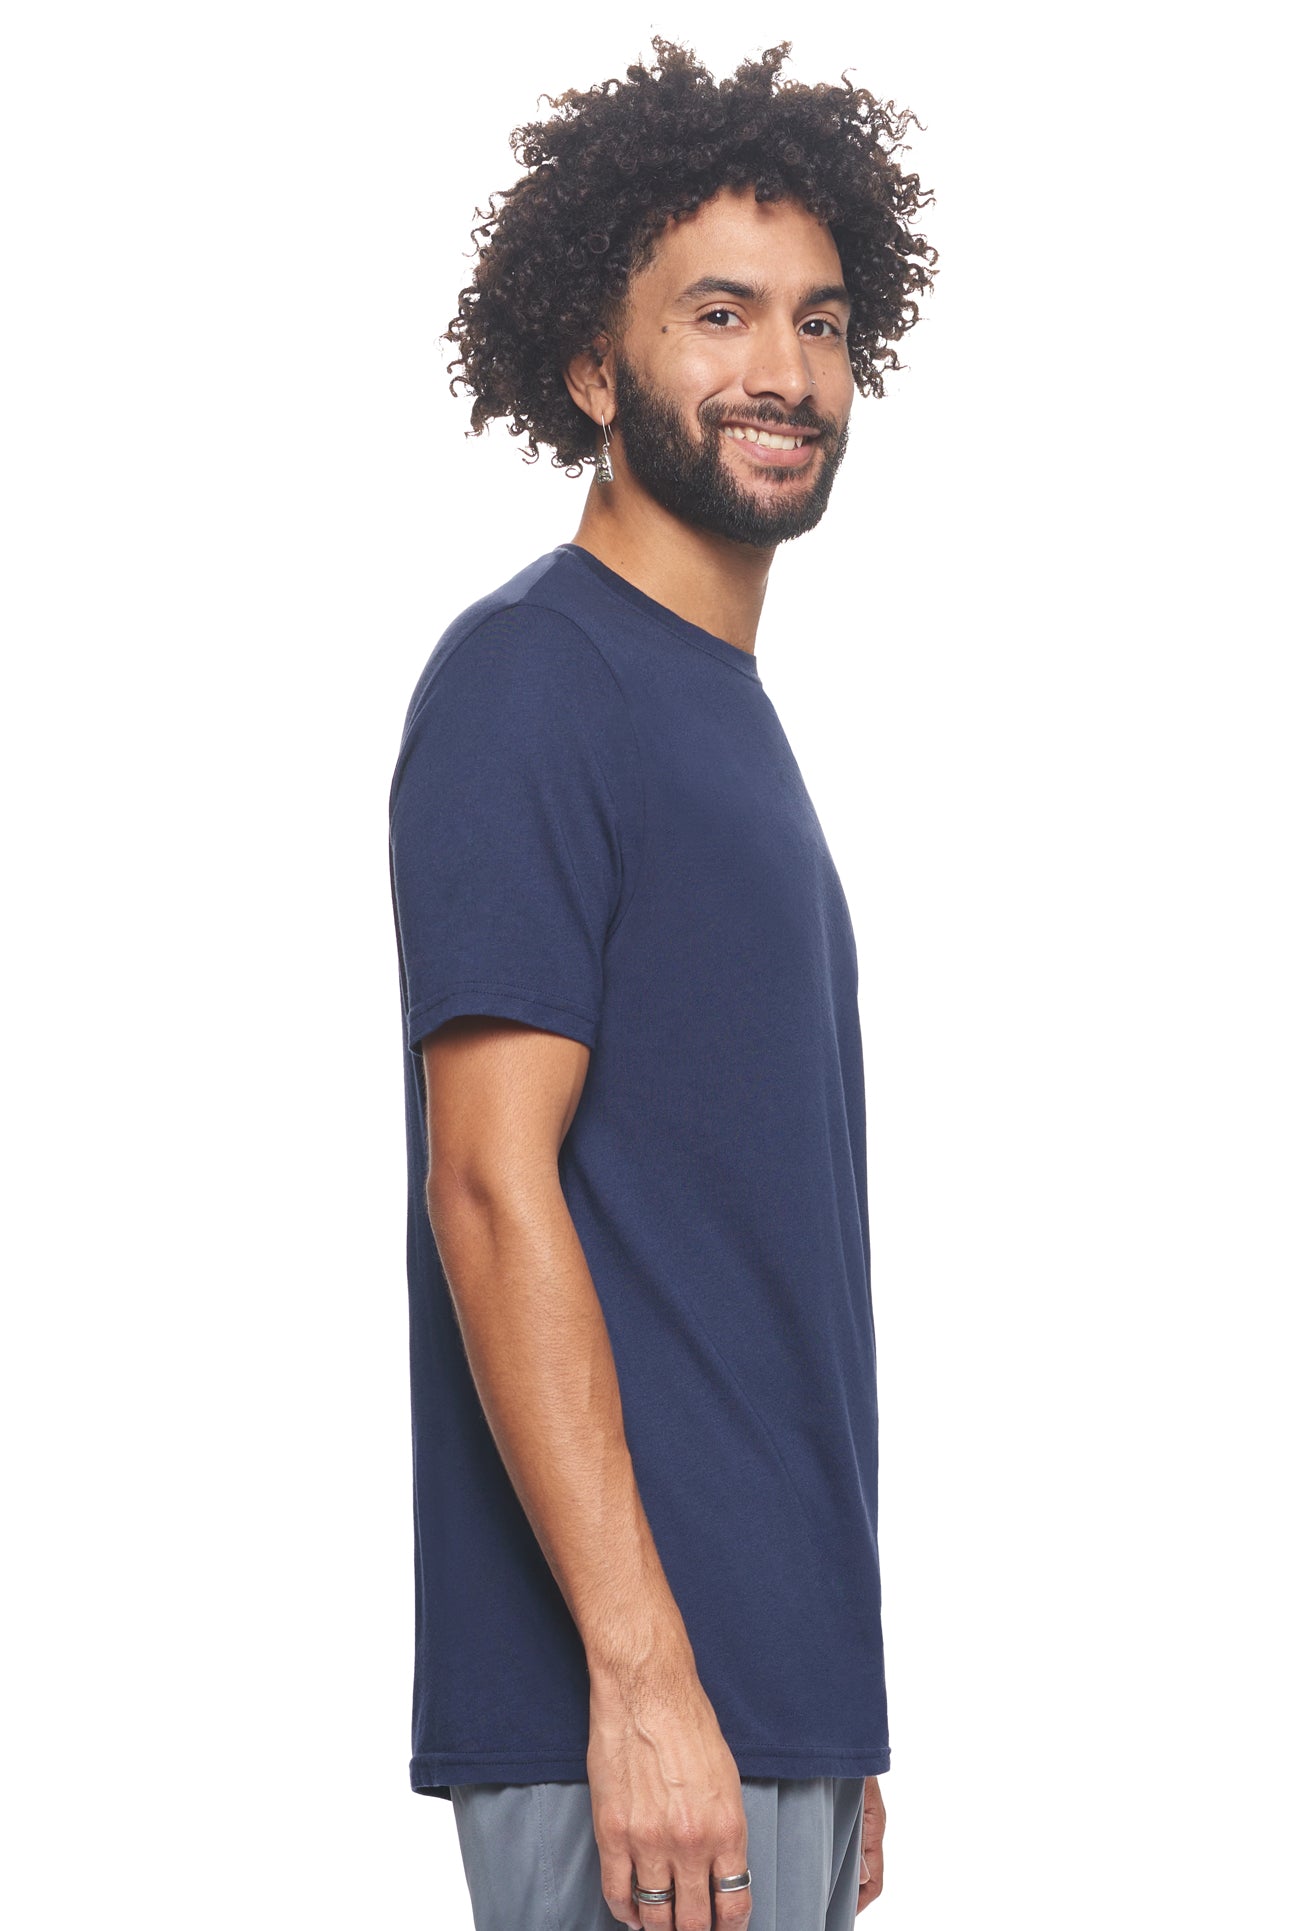 Expert Brand Wholesale Sustainable Eco-Friendly Apparel Micromodal Cotton Men's Crewneck T-Shirt Made in USA navy 3#navy